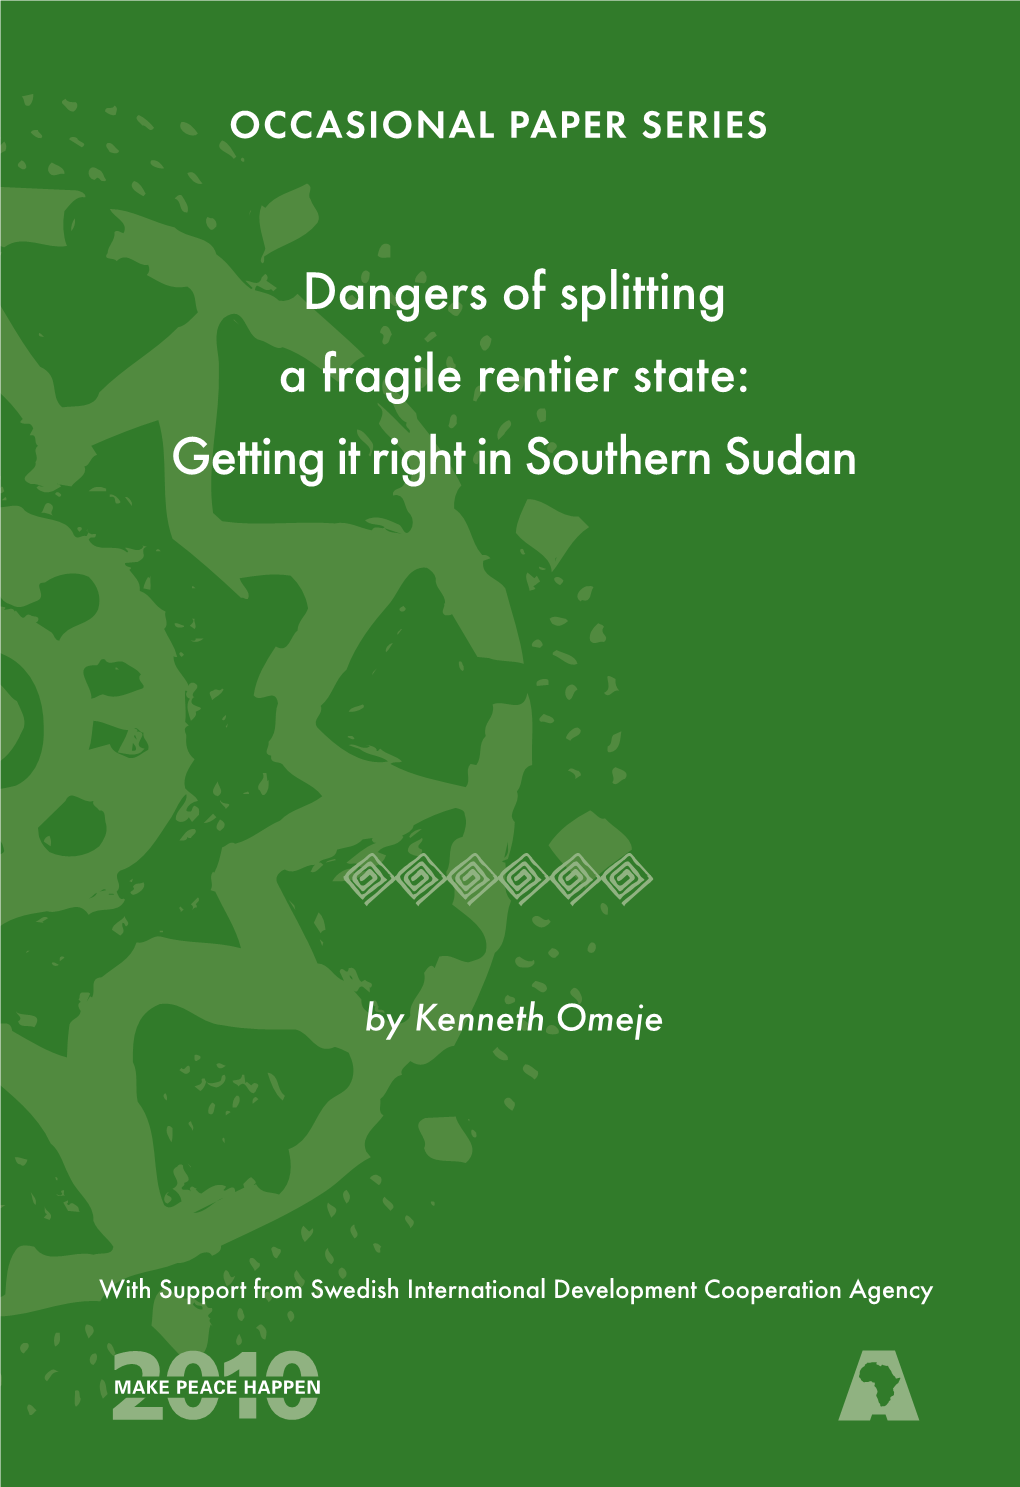 Dangers of Splitting a Fragile Rentier State: Getting It Right in Southern Sudan